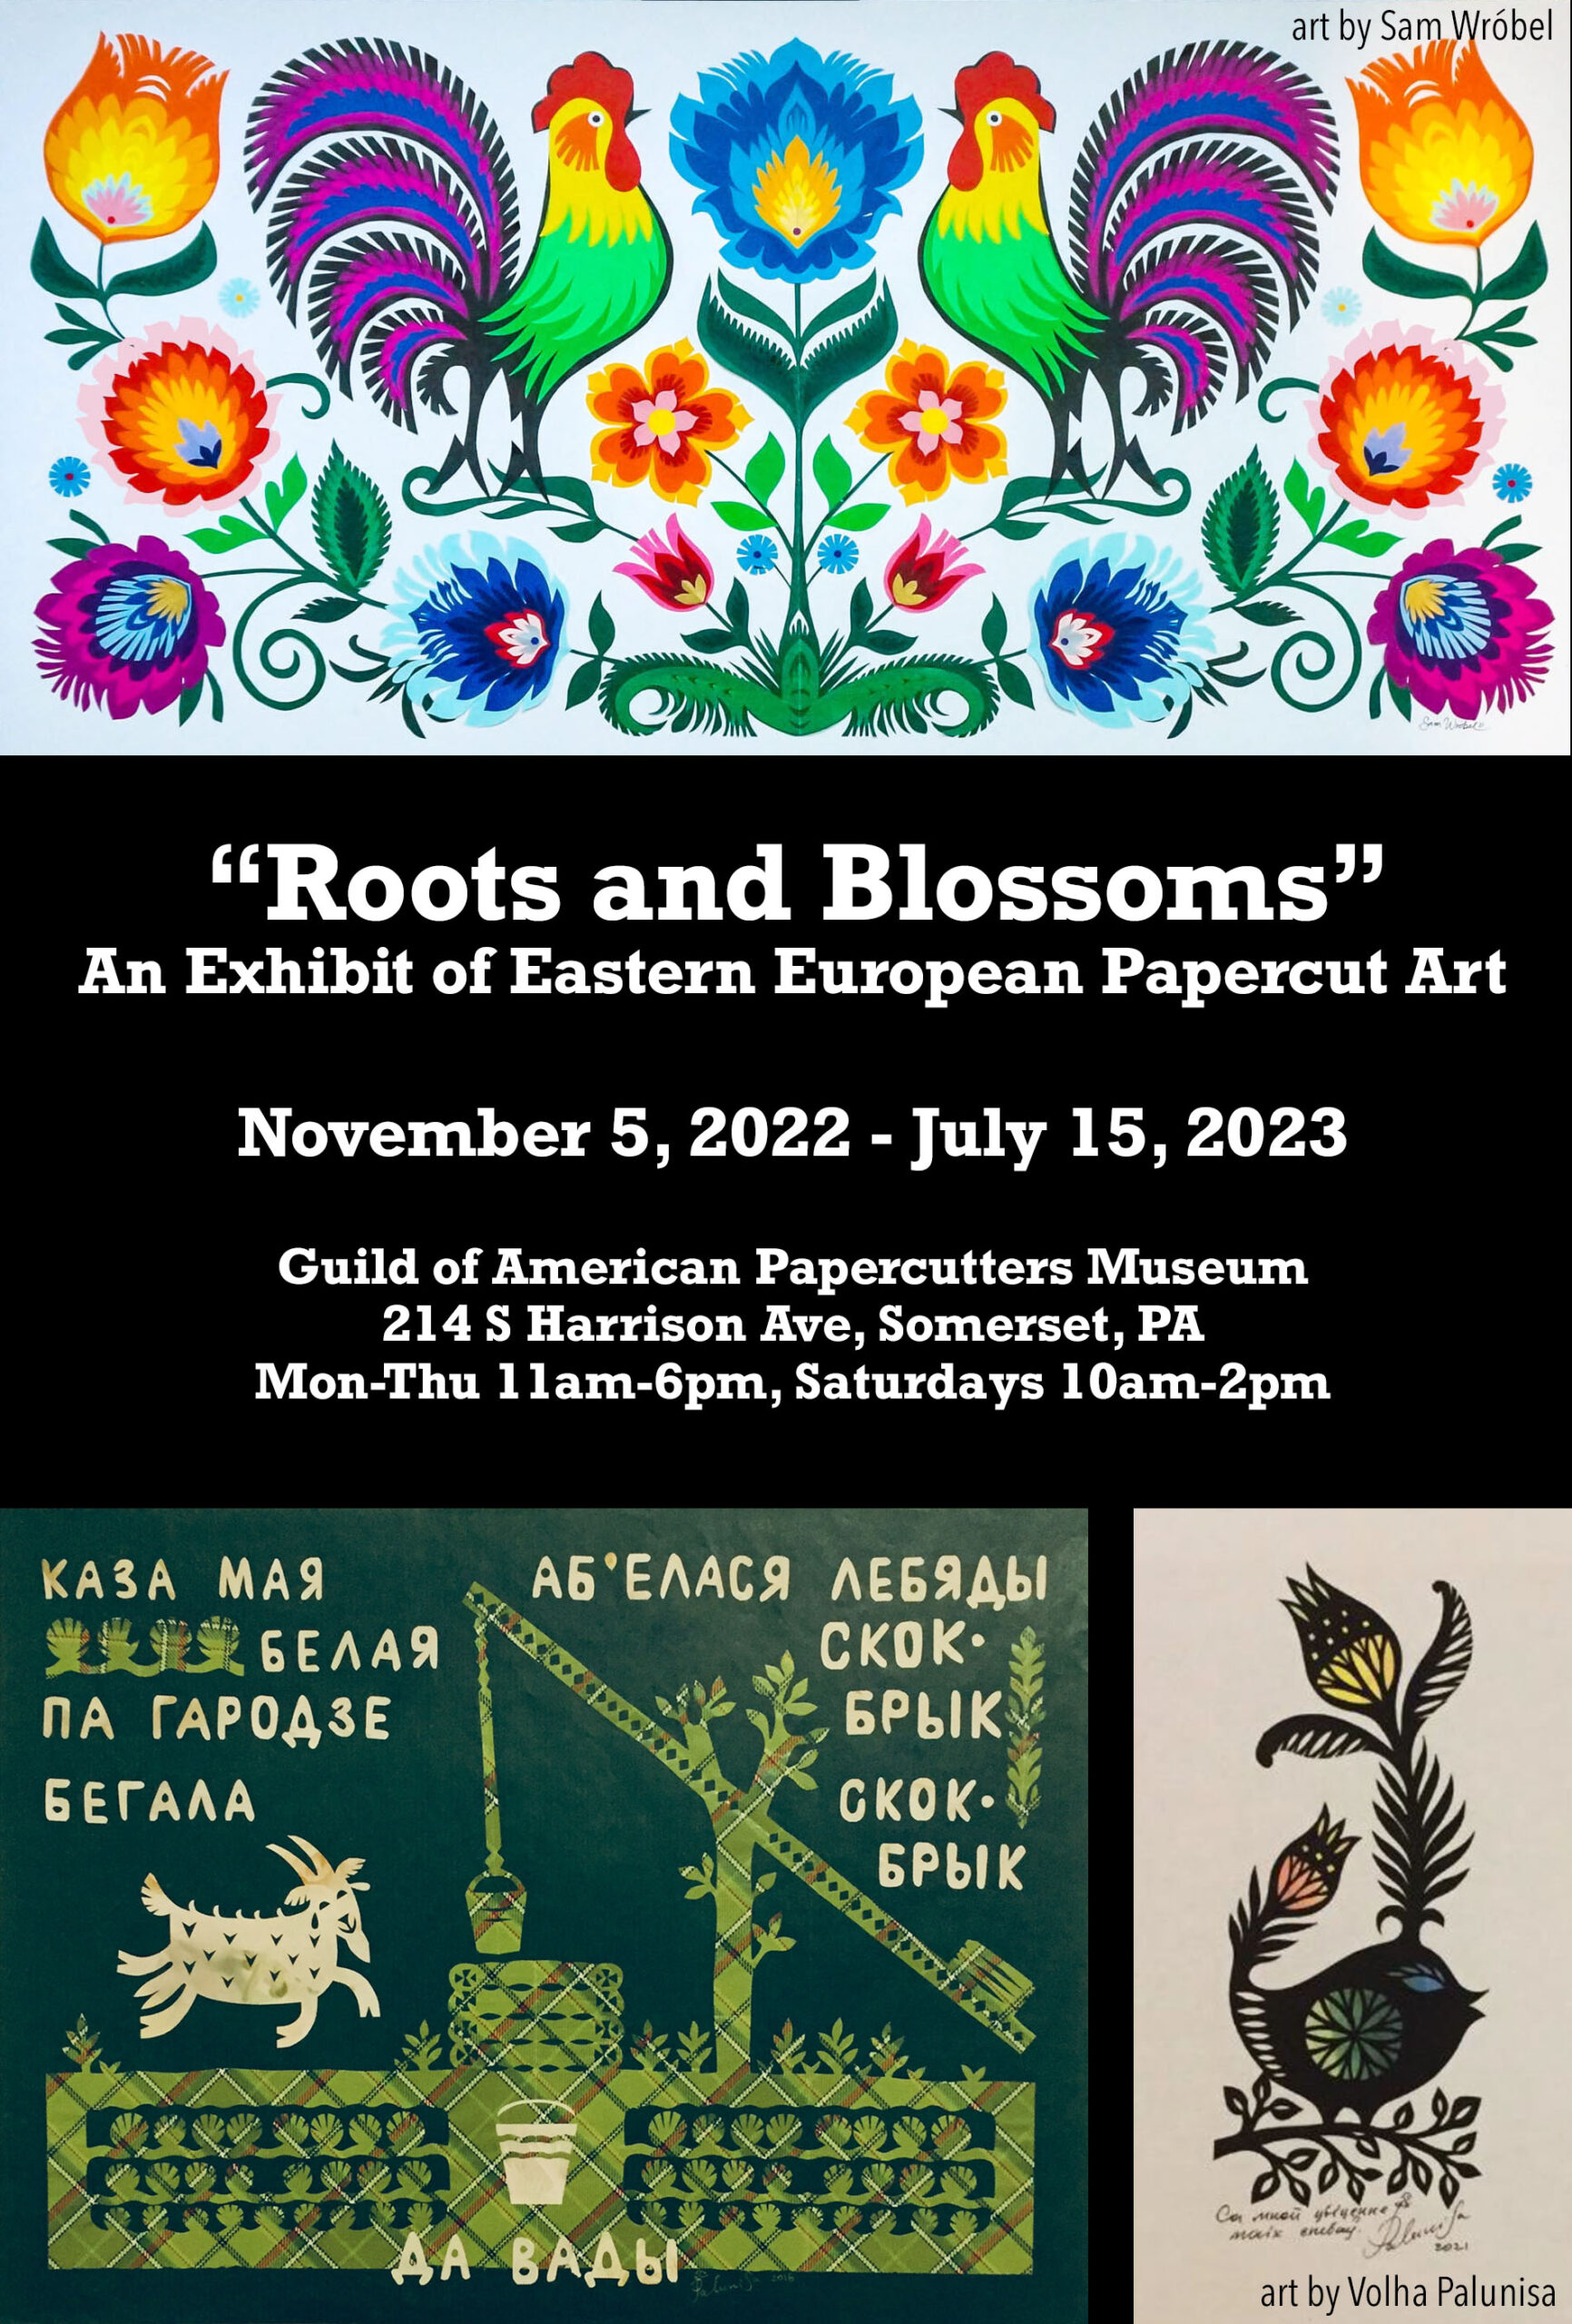 Graphic for Roots and Blossoms exhibition of Eastern European Papercut Art at the GAP National Museum